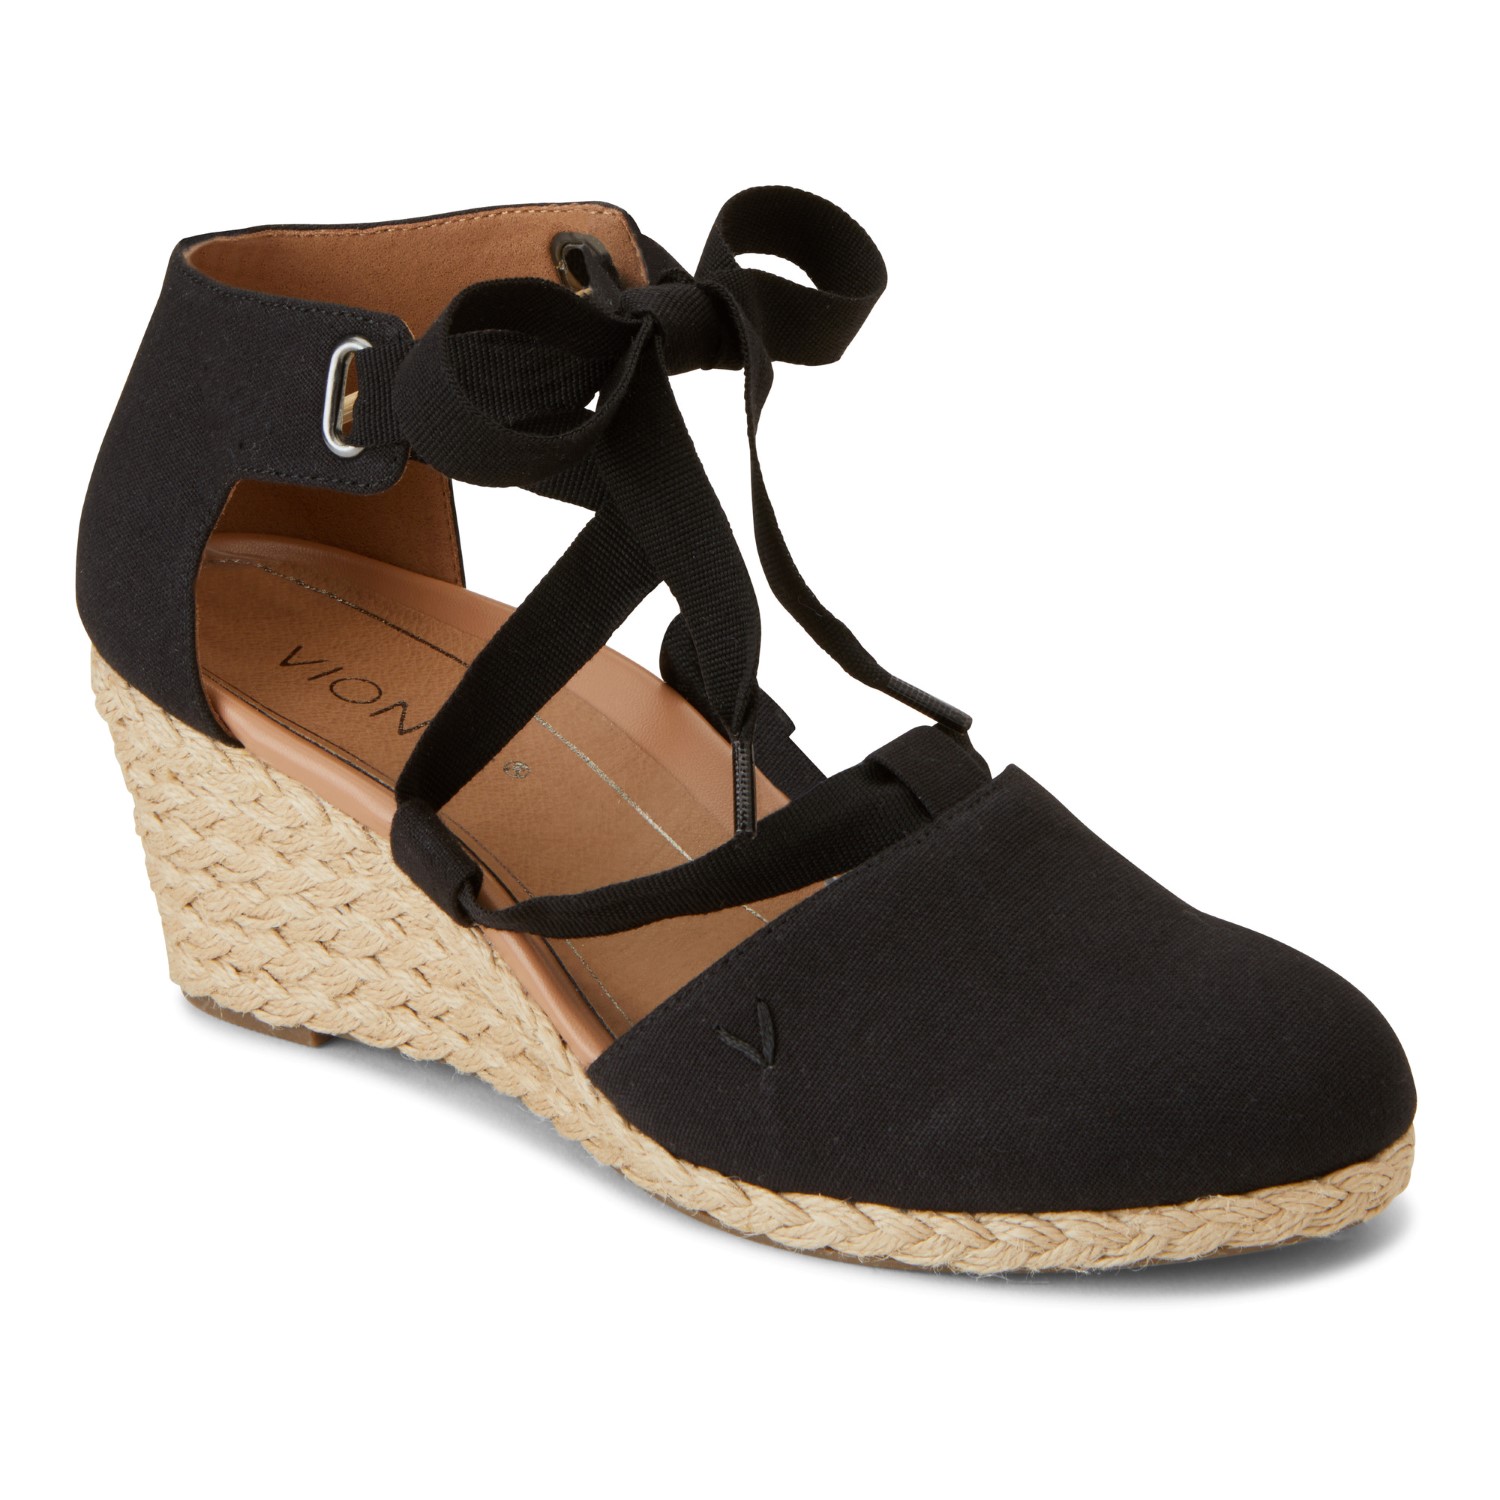 Vionic Womens Tulum Vero Wedge Ladies Espadrille Sandals with Concealed Orthotic Arch Support